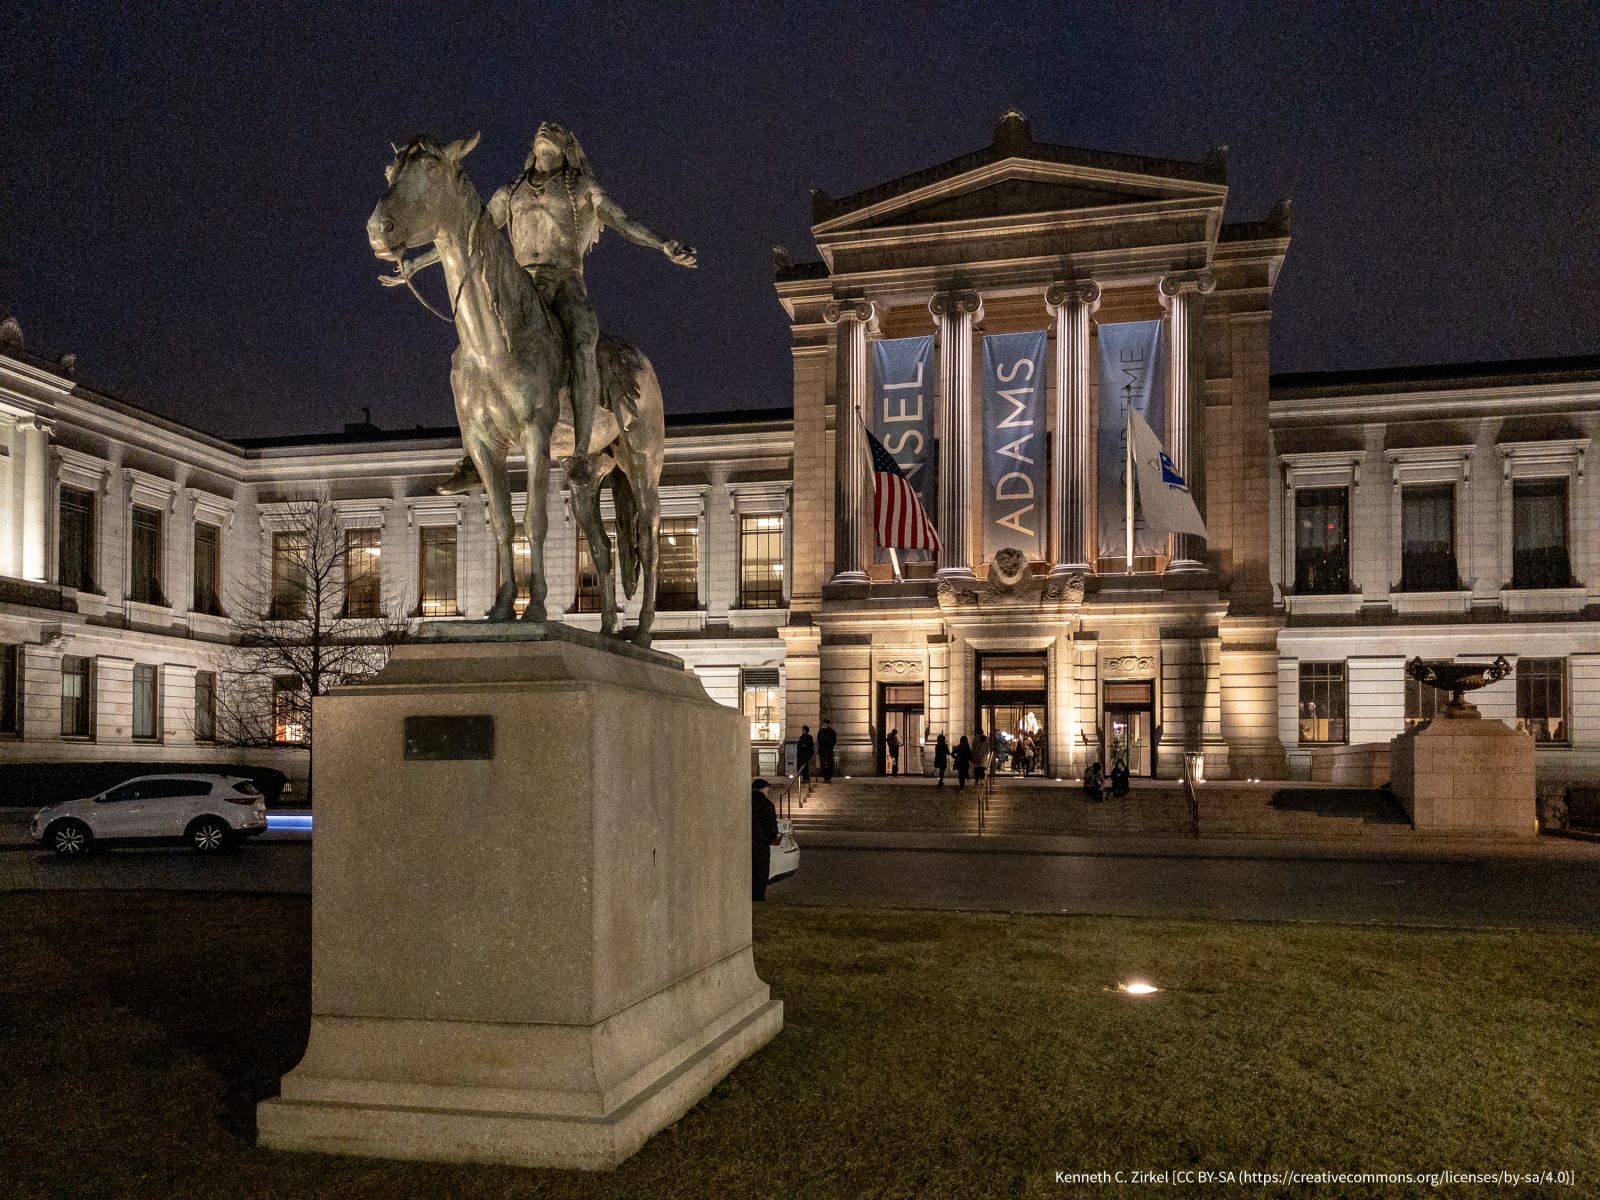 Museum of Fine Arts Boston Exterior at Night -- att. to Kenneth C. Zirkel (CC BY-SA)